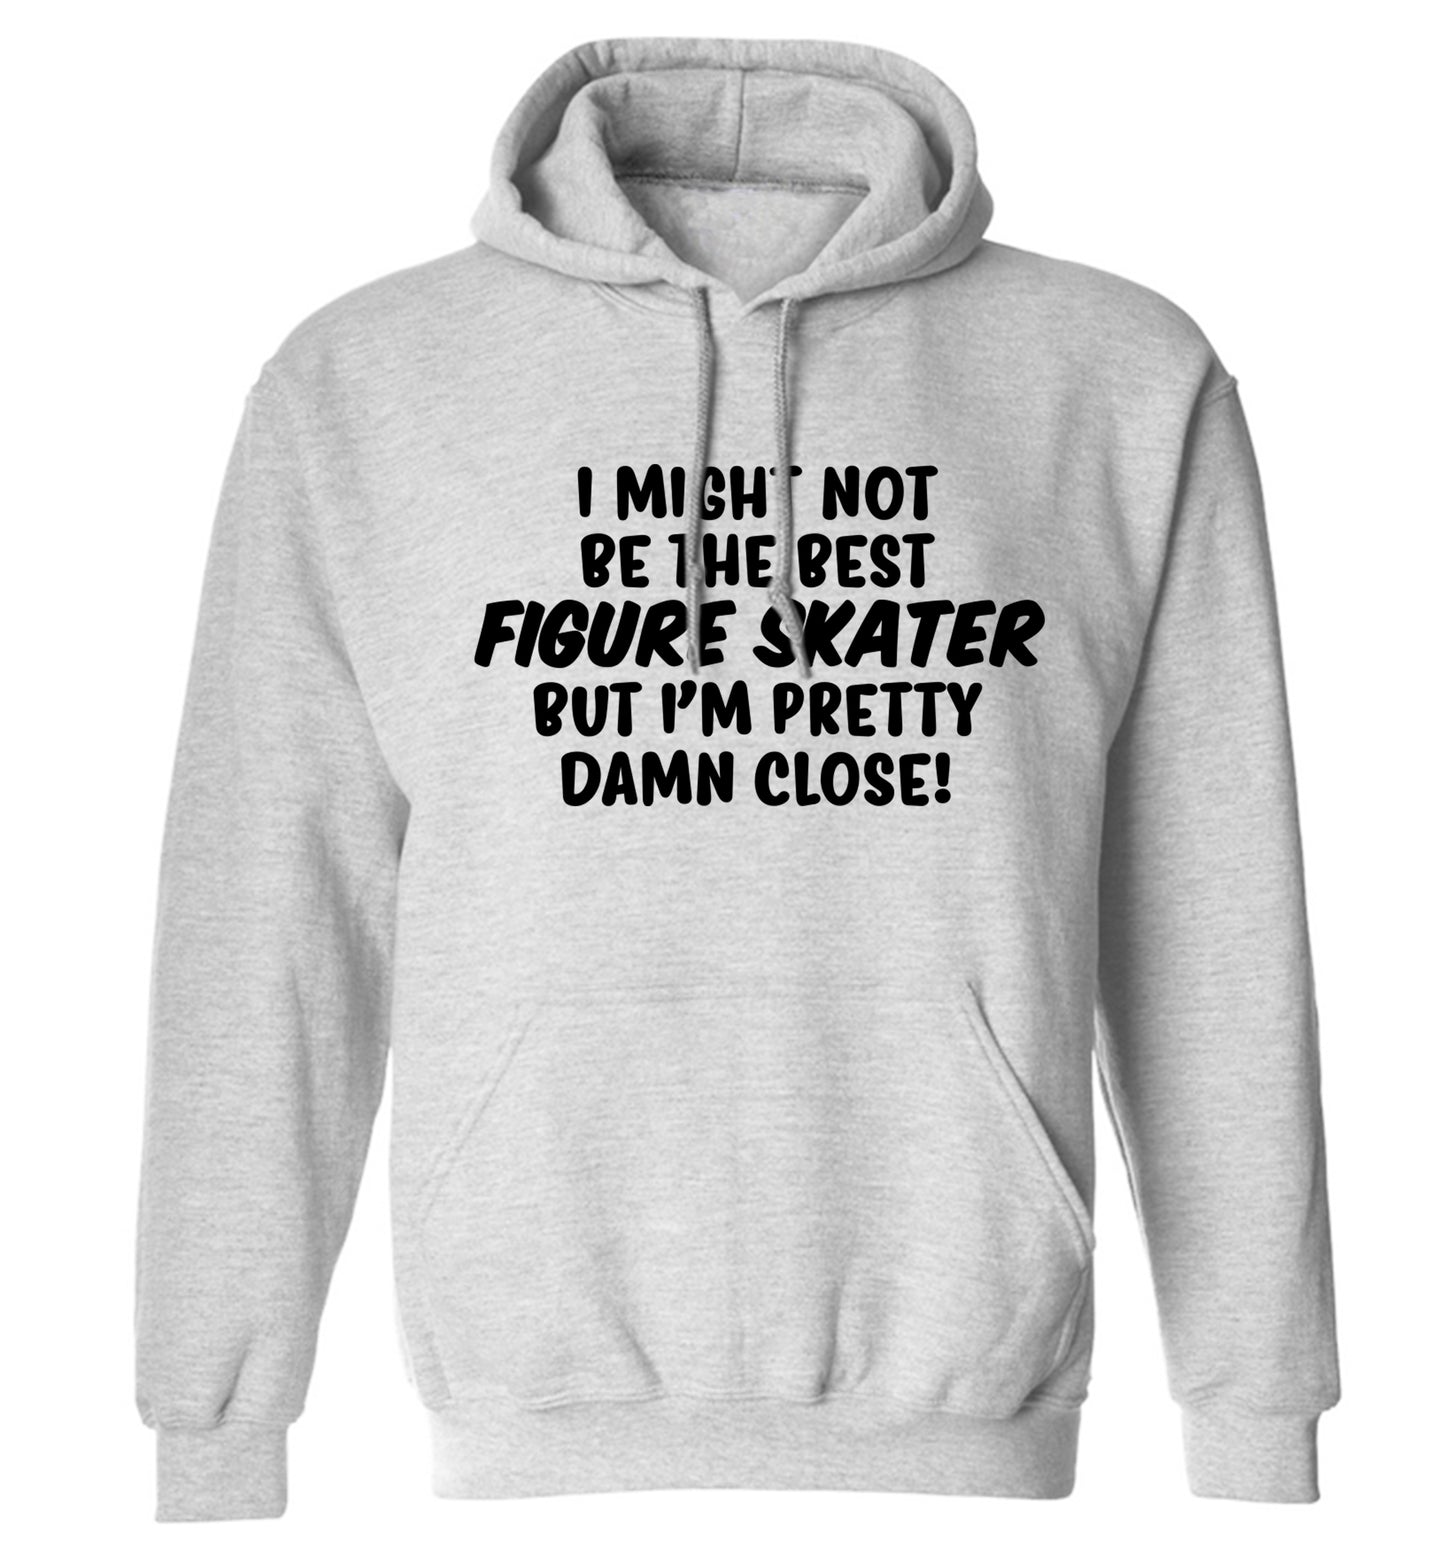 I might not be the best figure skater but I'm pretty damn close! adults unisexgrey hoodie 2XL